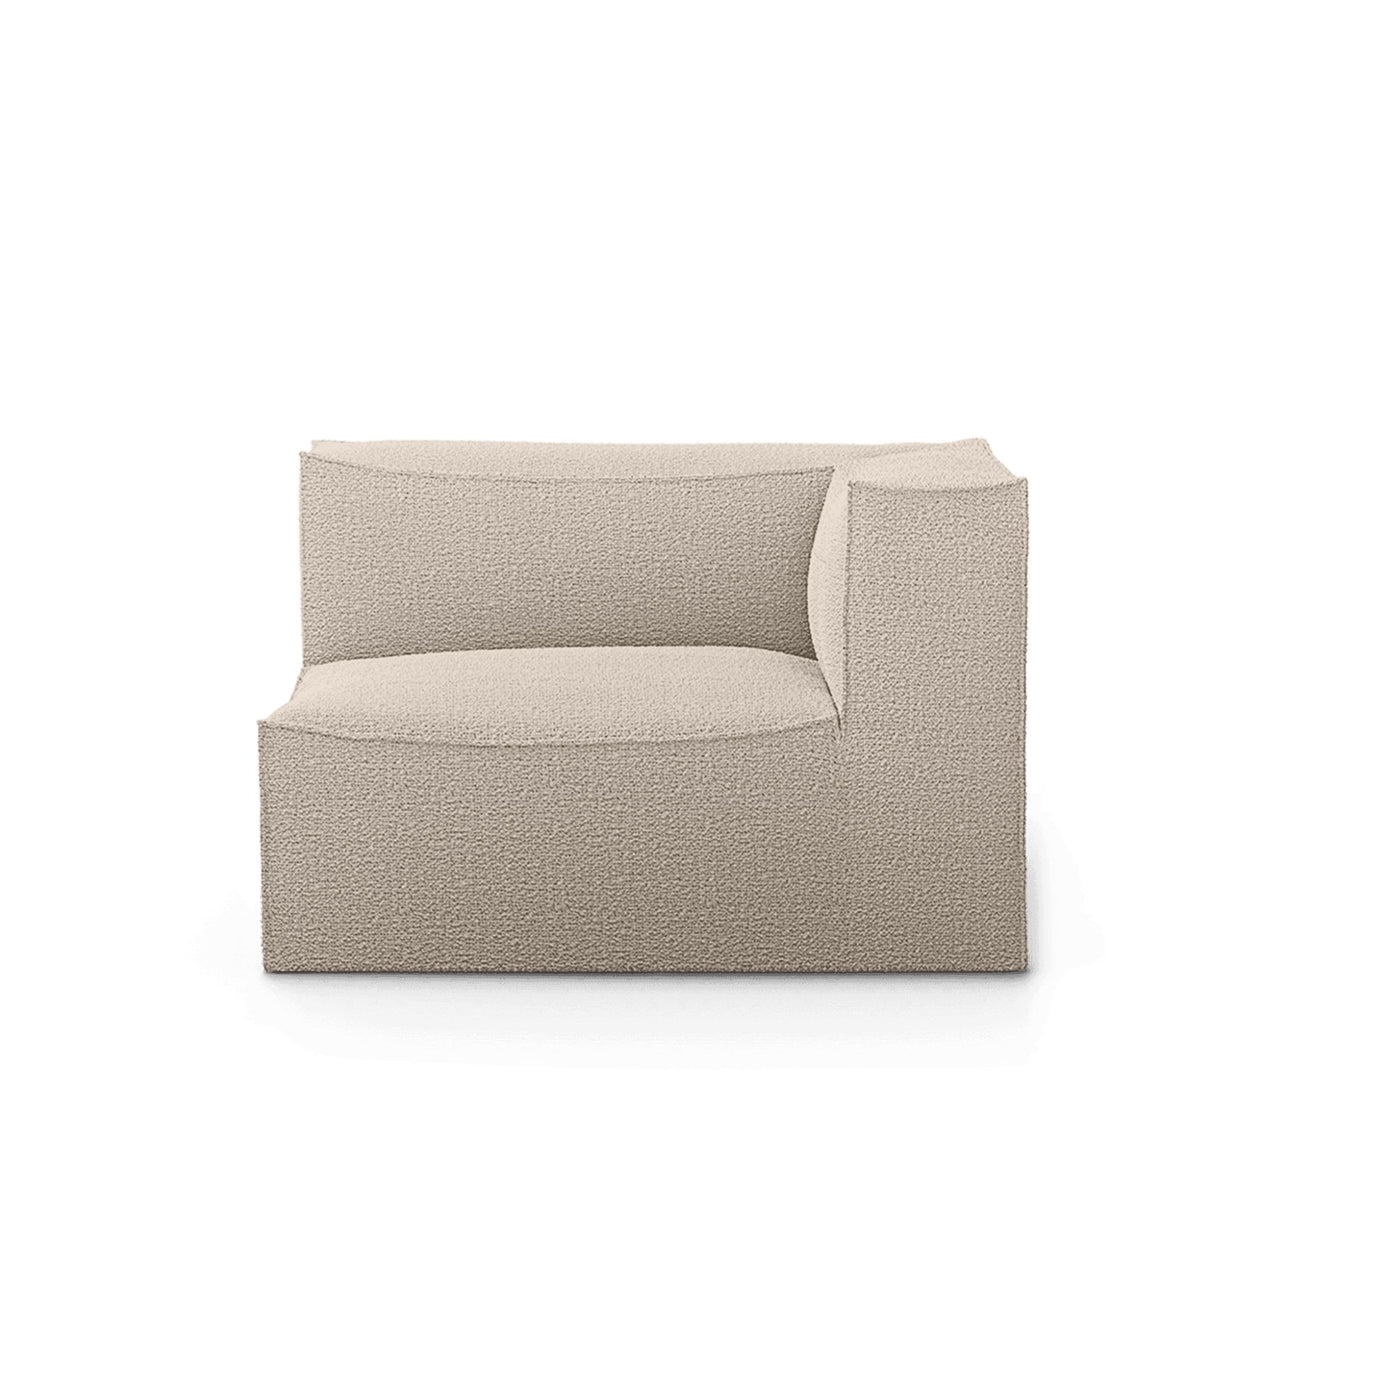 Ferm Living Catena Modular Series. Shop online at someday designs. S401 armrest right in #colour_natural-wool-boucle